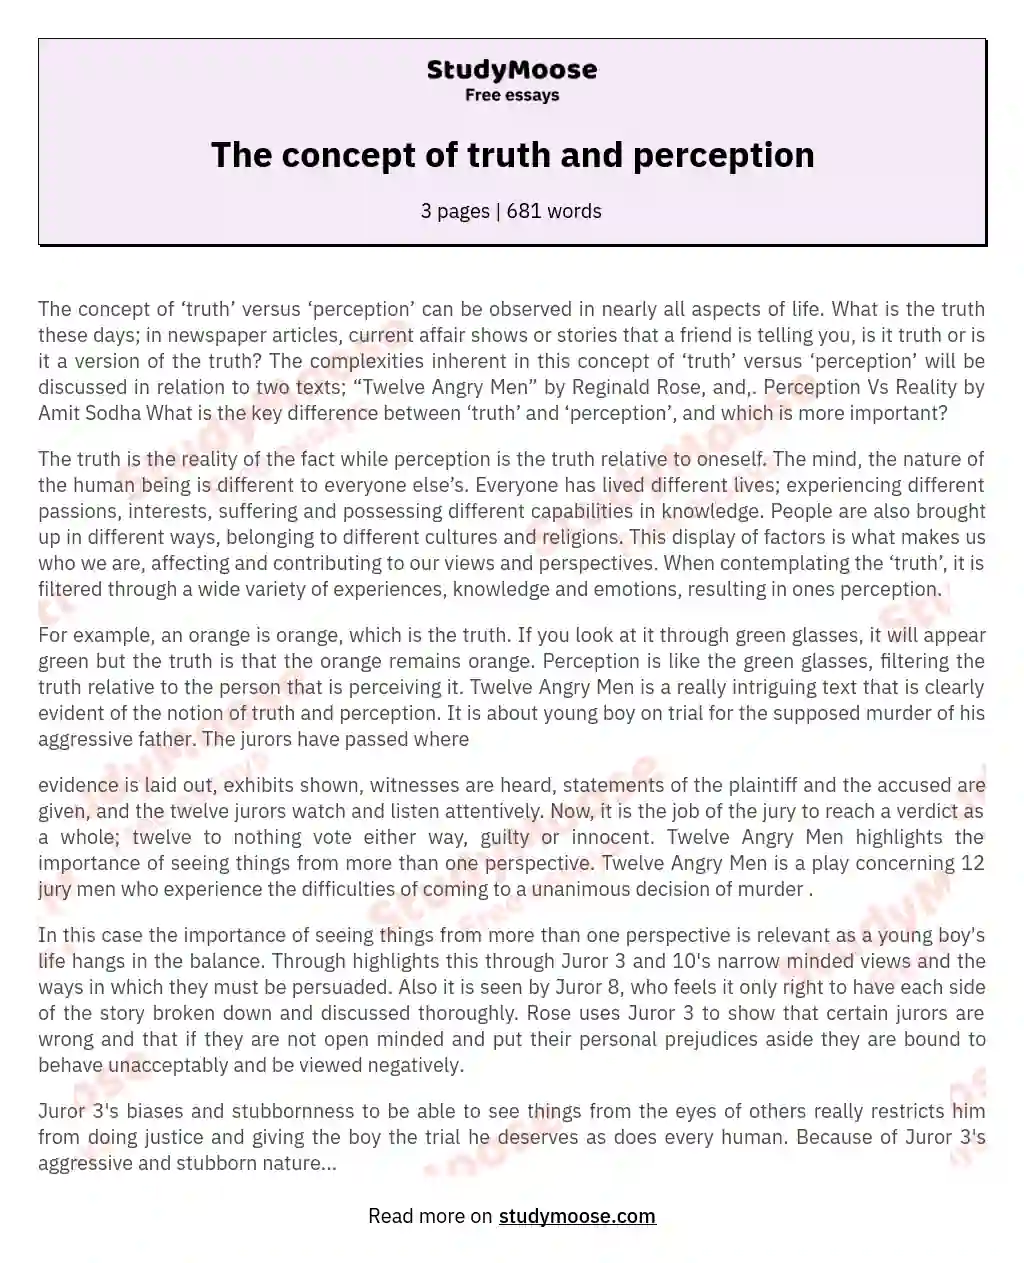 The concept of truth and perception essay